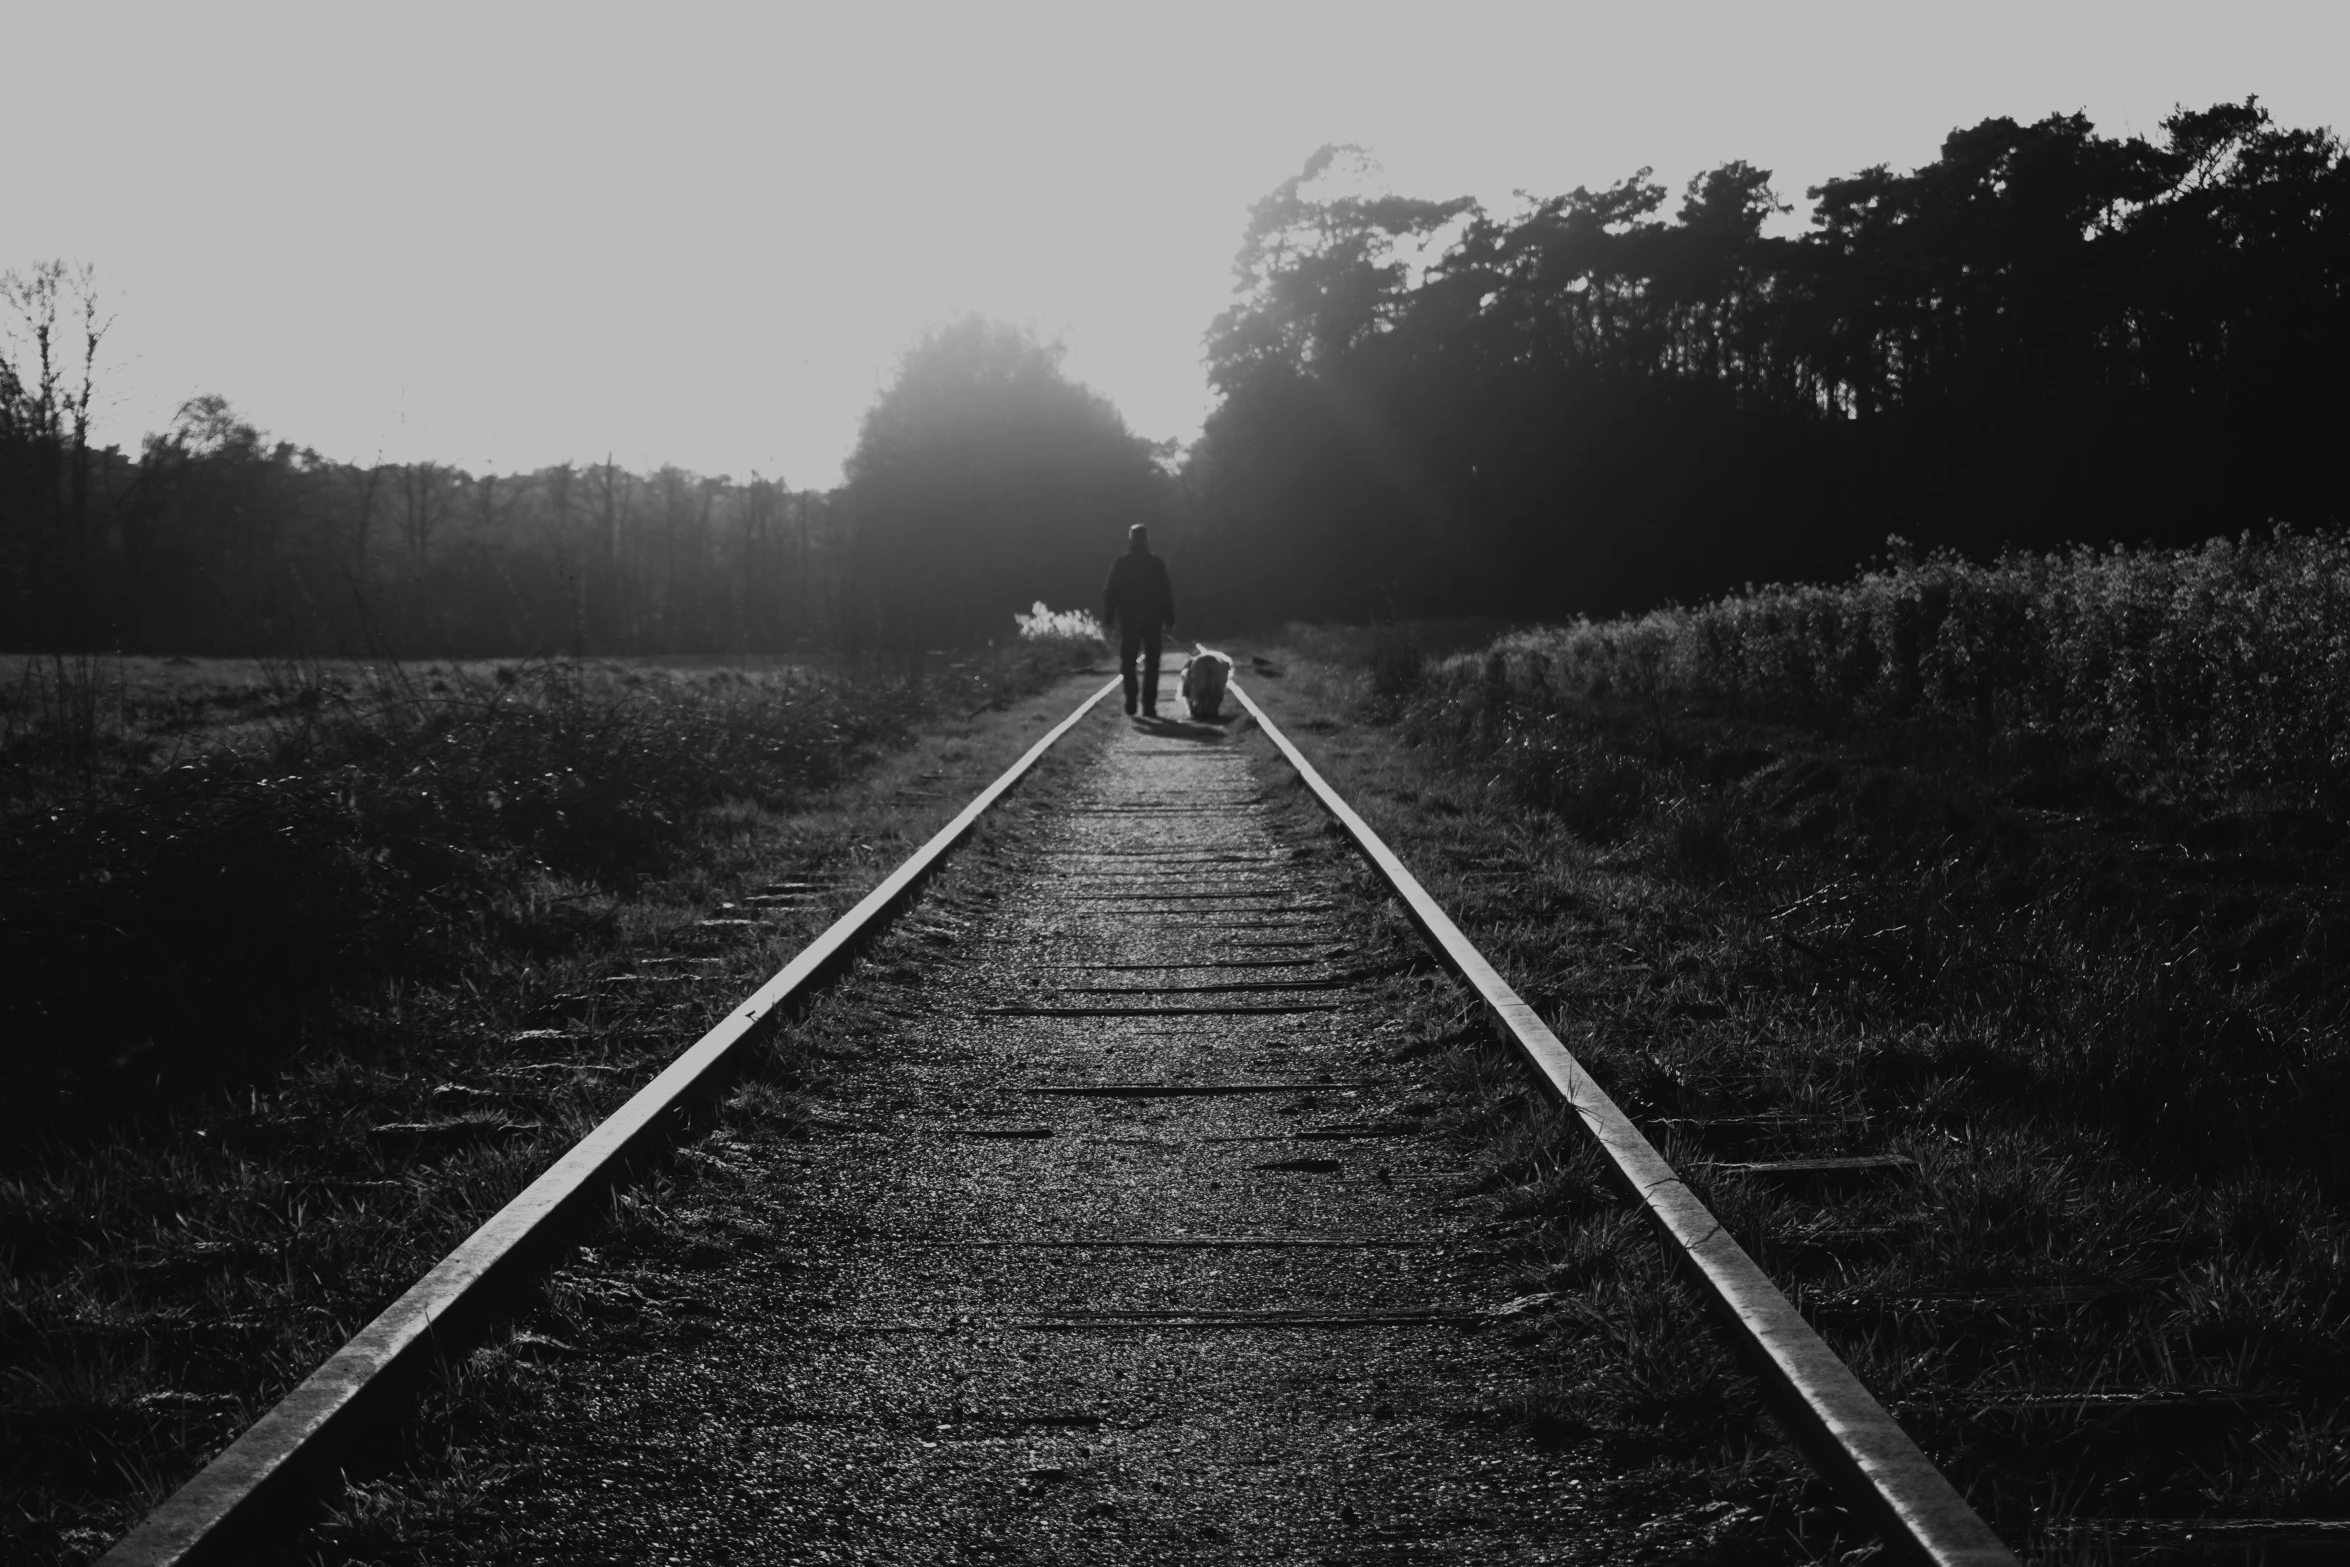 two people standing on a train track in the middle of some trees